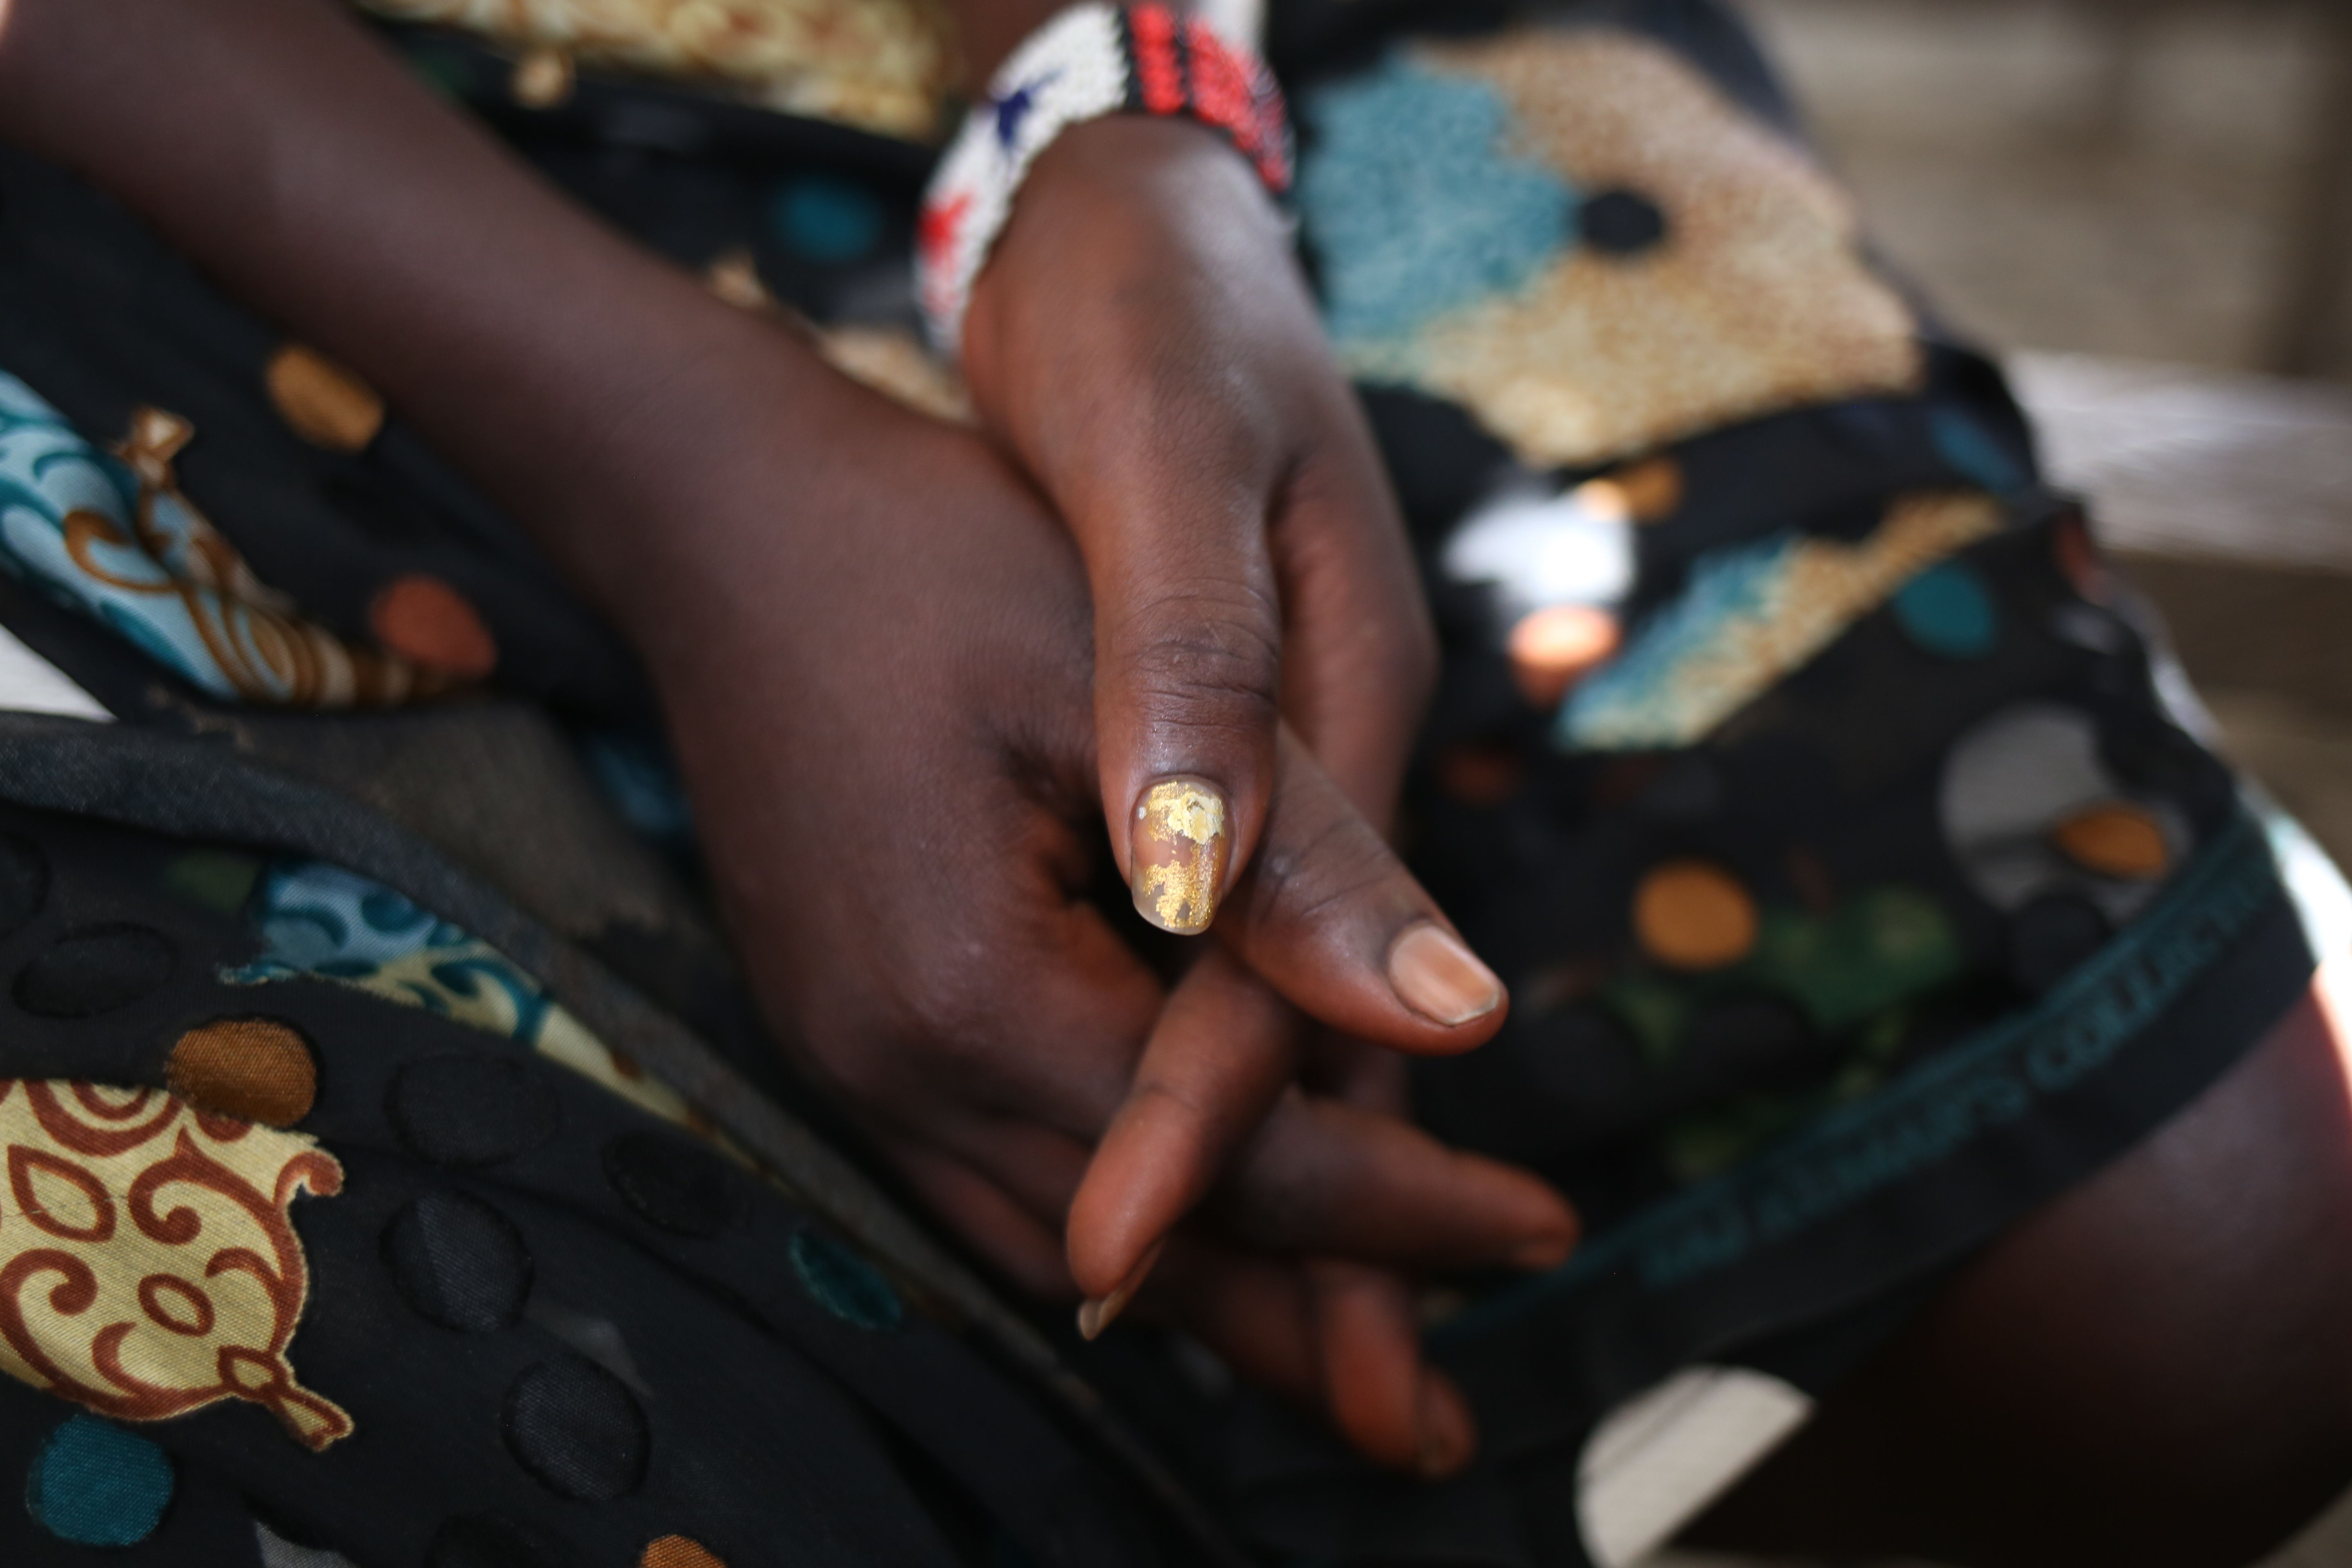 In South Sudan's civil war, rape is wielded as a weapon. Despite dangerous stigma, some South Sudanese women are speaking out. Image by Cassandra Vinograd. South Sudan, 2017.